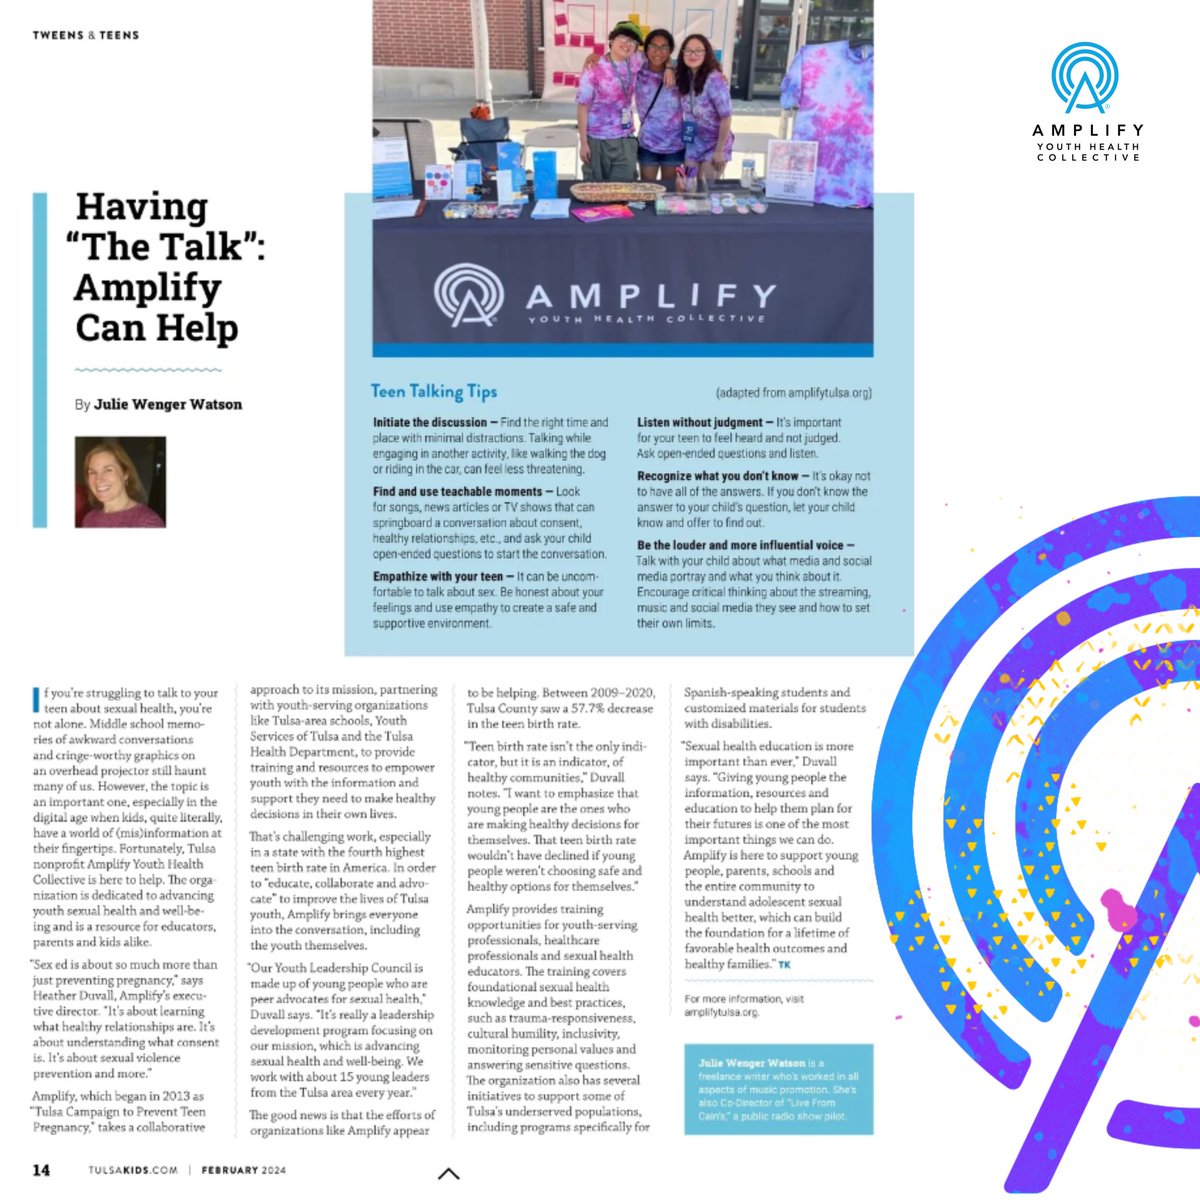 Thank you @tulsakids for featuring us in the February issue! 🥳

Check out the article to learn more about Amplify and get tips for talking with young people about love, sex, and healthy relationships! tulsakids.com/having-the-tal…

 #AmplifyTulsa #LetsTalk #TalkingIsPower